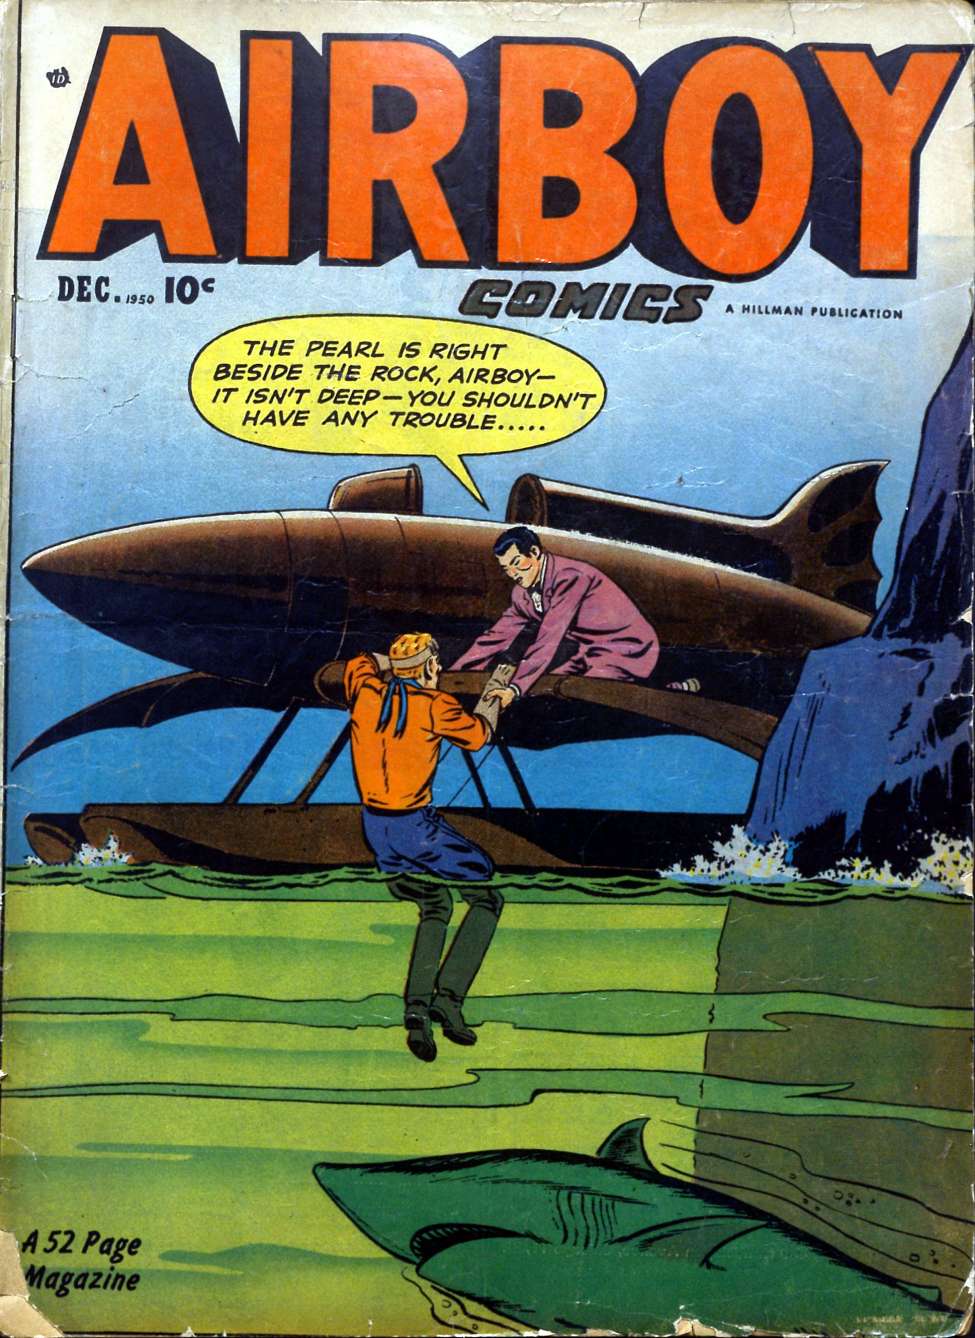 Book Cover For Airboy Comics v7 11